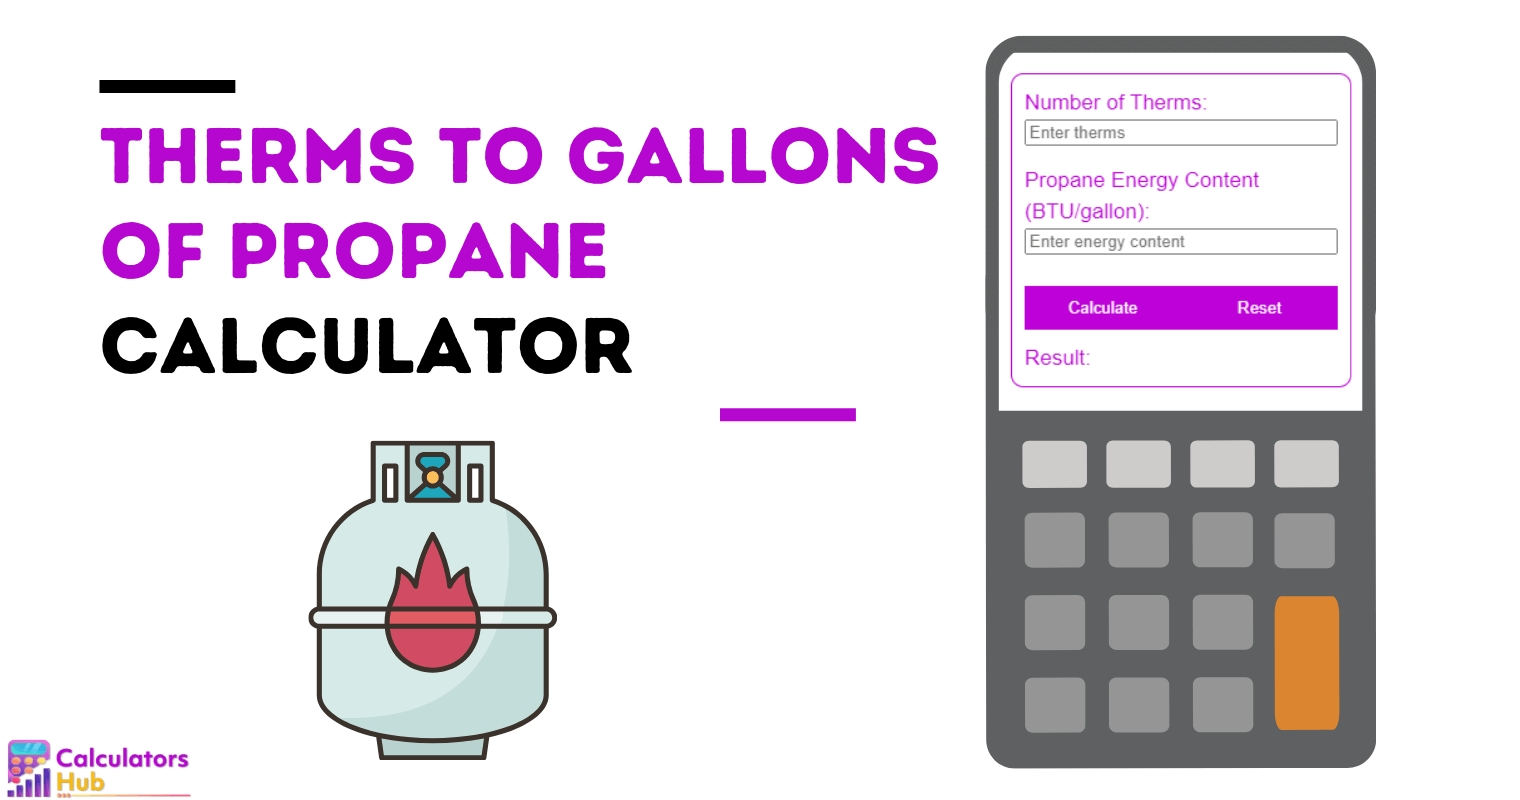 Therms to Gallons of Propane Calculator